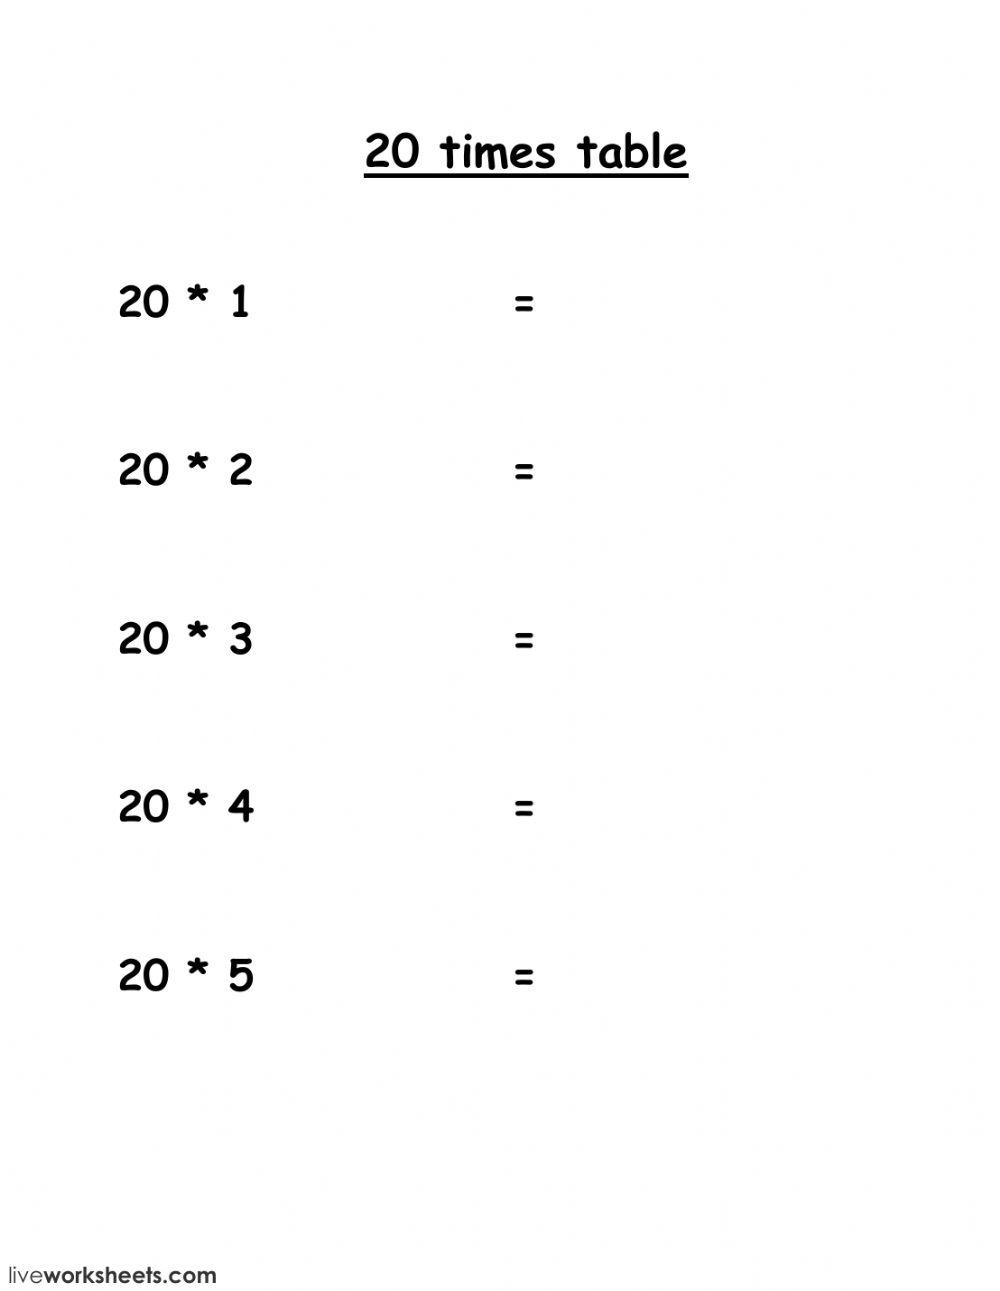 20 times table